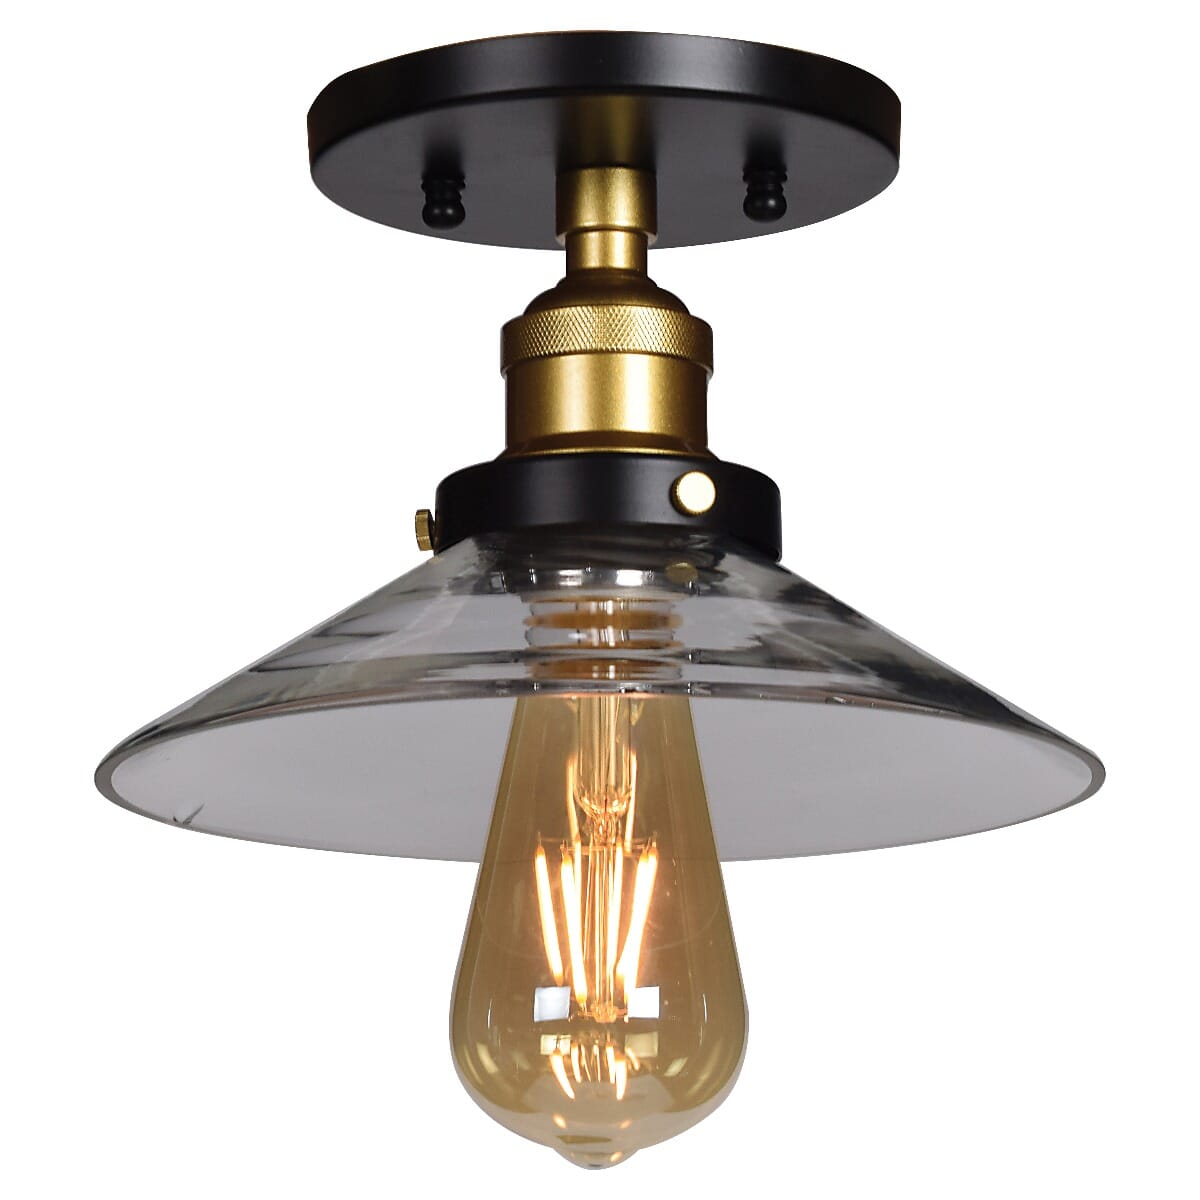 Access The District Ceiling Light in Black and Gold